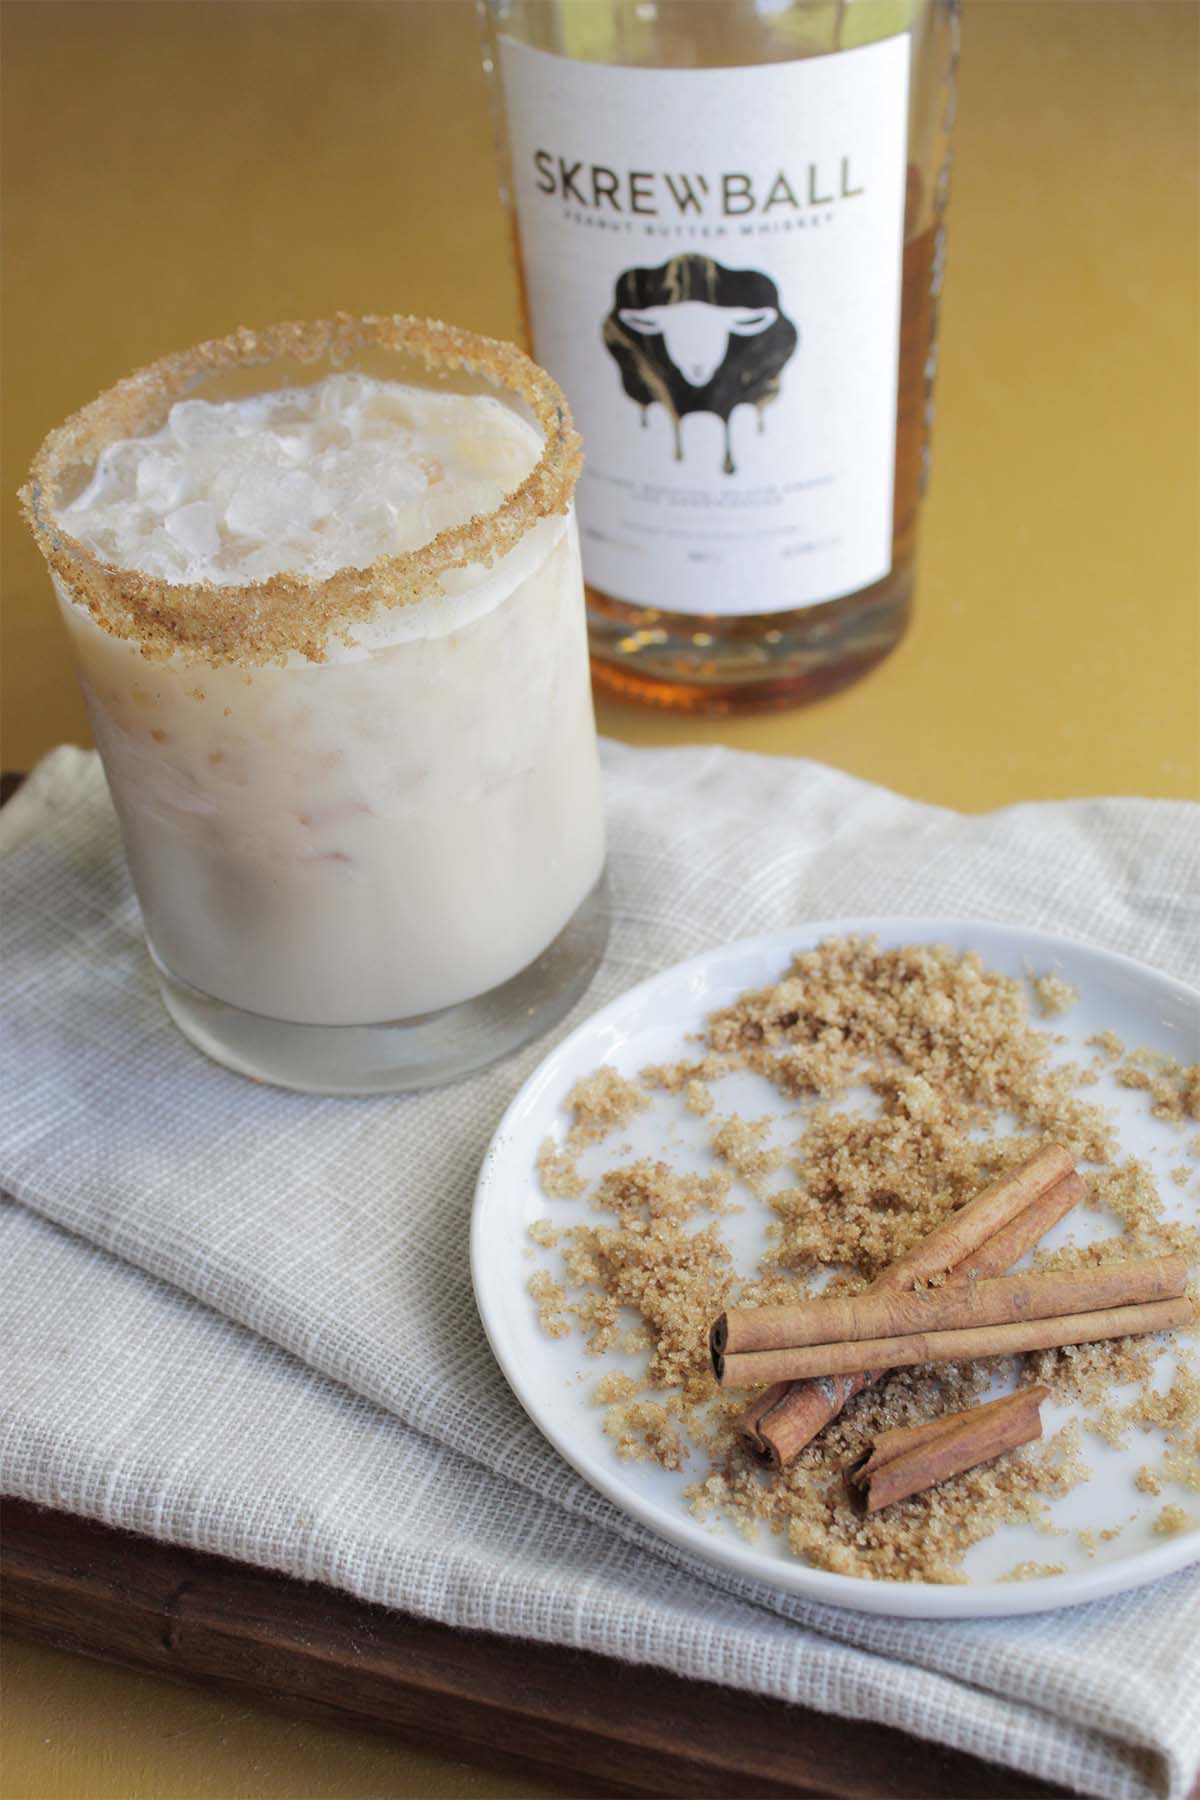 peanut butter whiskey and baileys with sugar rim